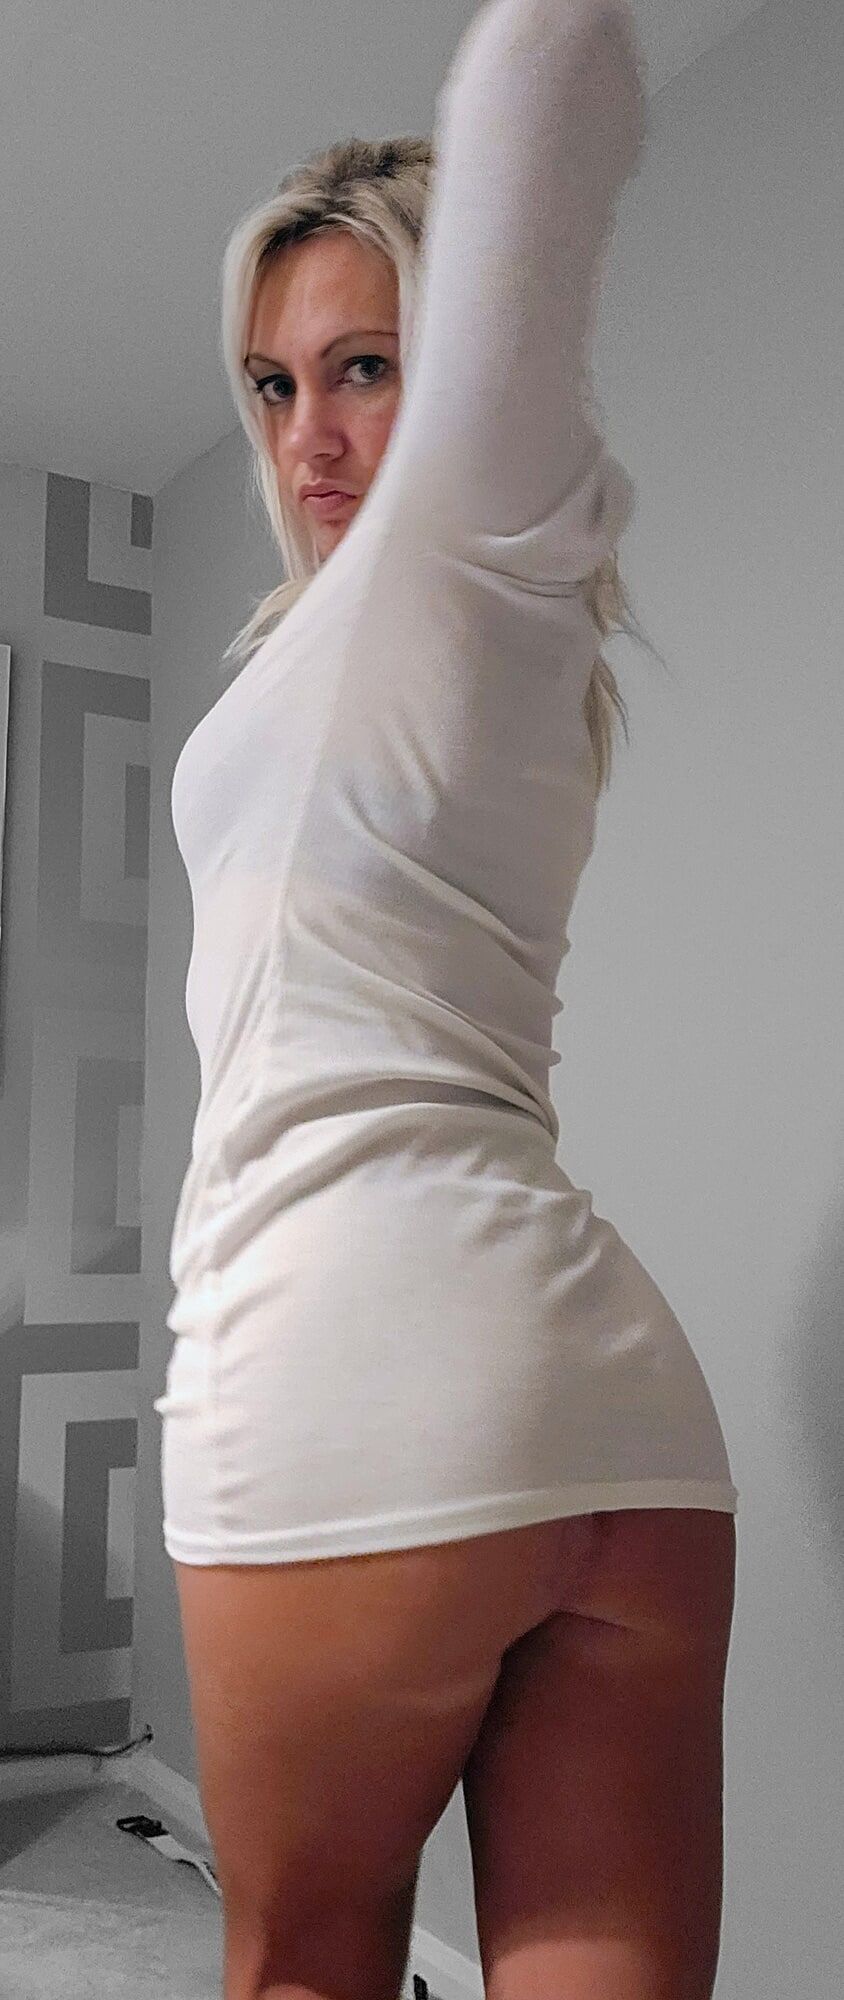 Wife's snapshots for hubby-showing off her sexy body #3